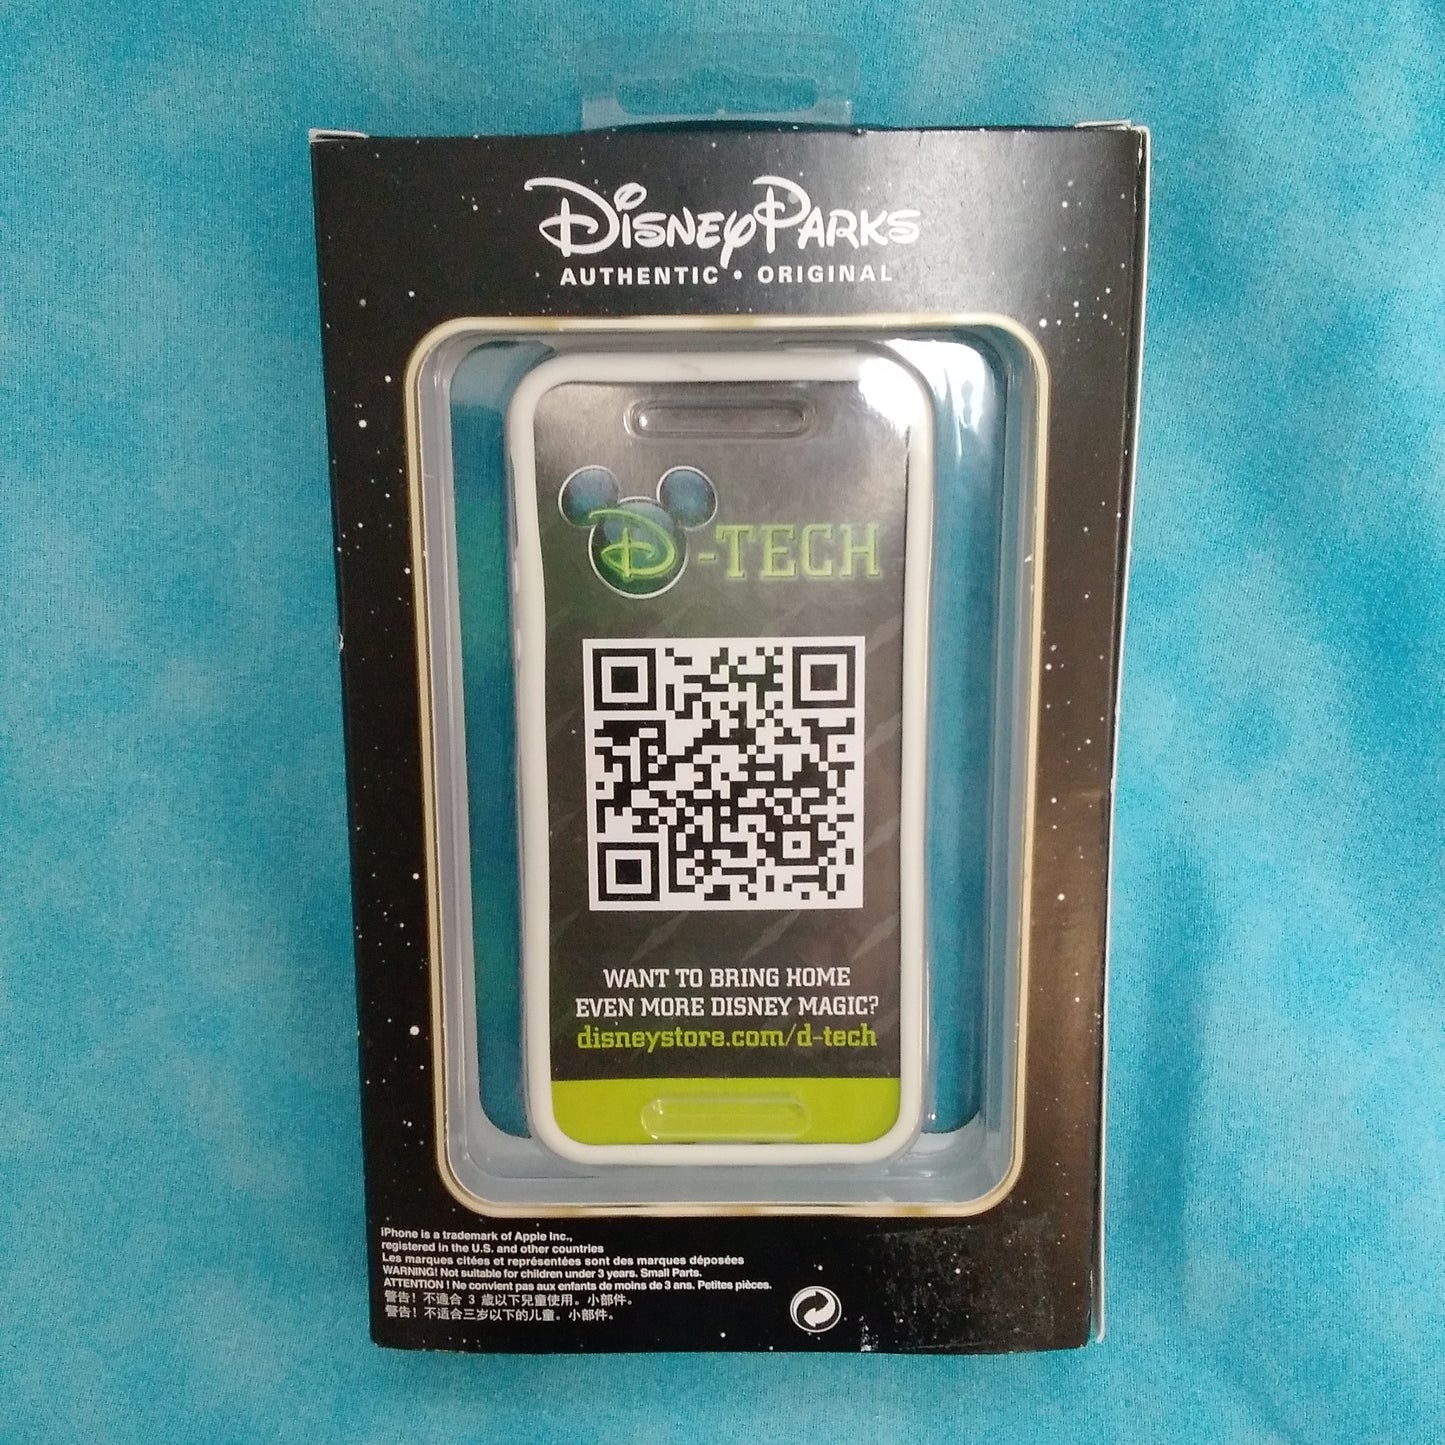 NIB - Disney Parks Star Wars iPhone Case - For use with: iPhone 5/5S